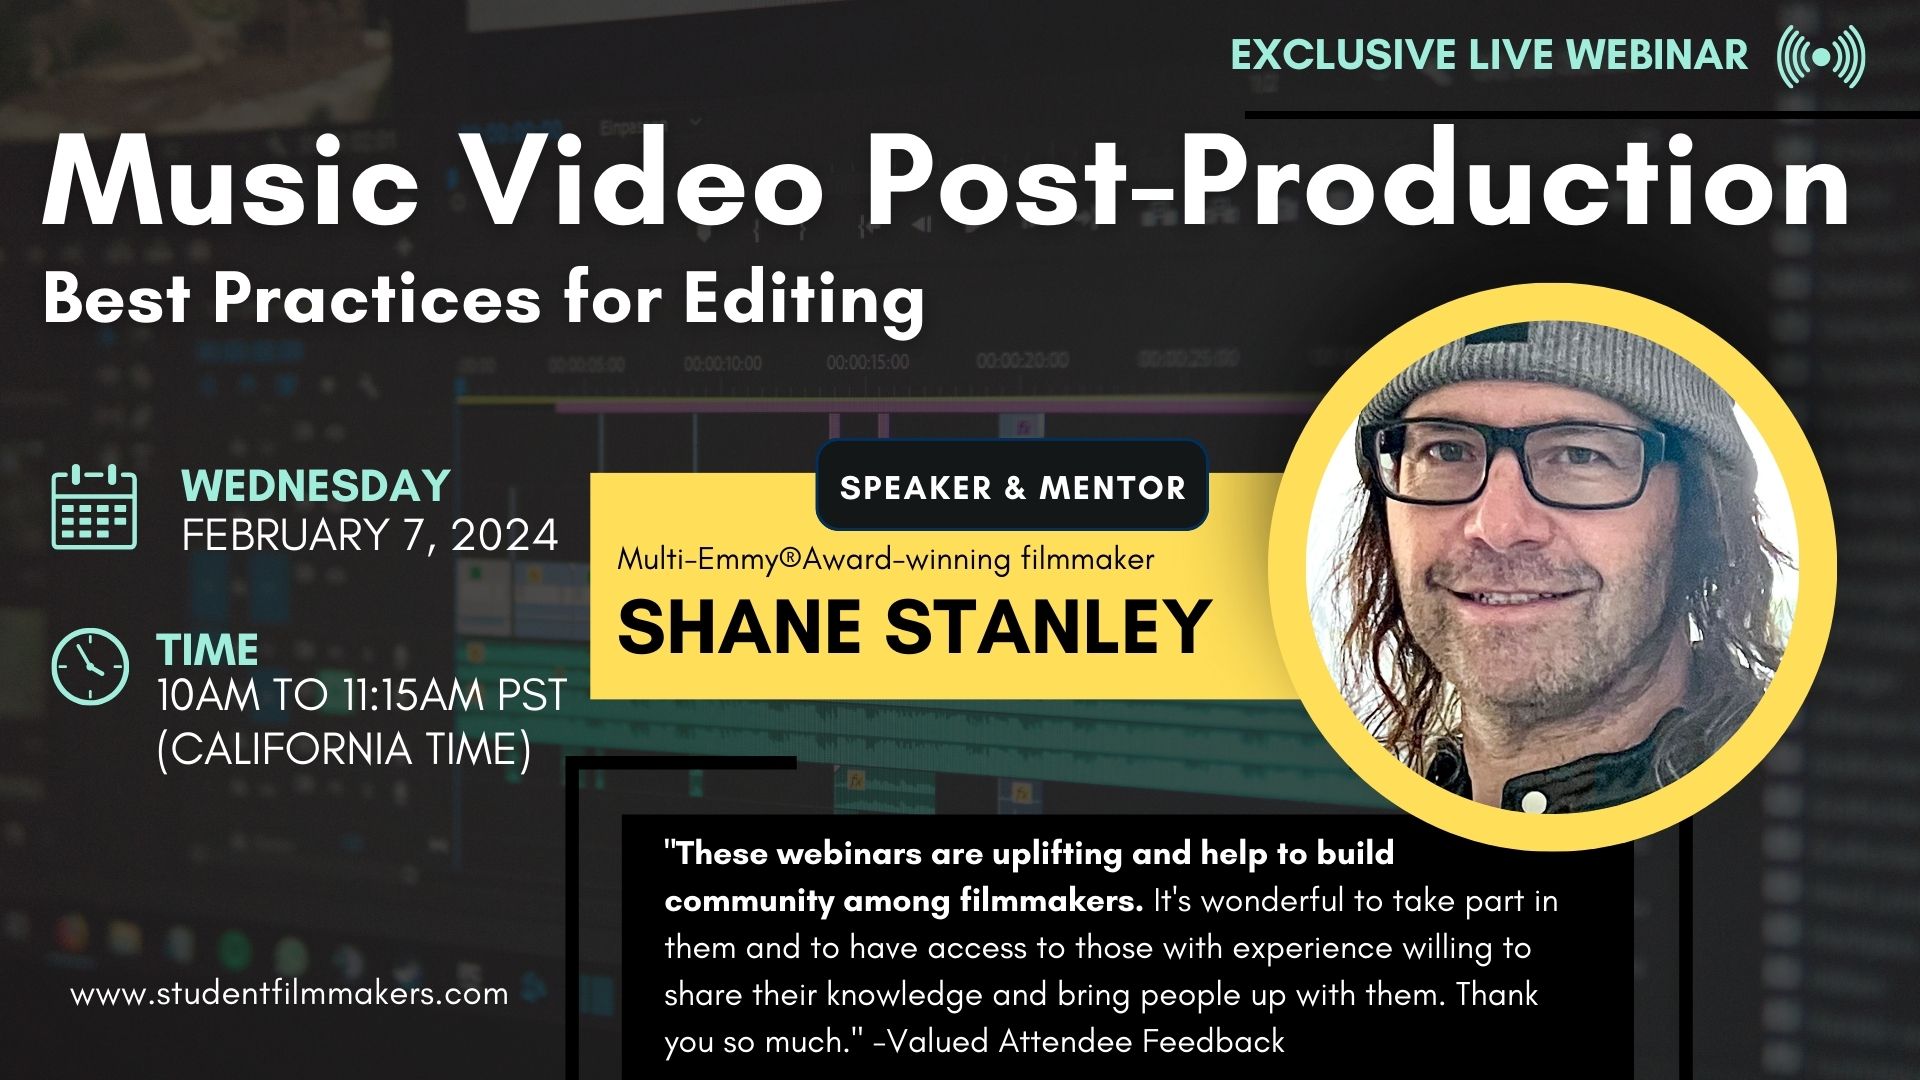 Music Video Post-Production Best Practices for Editing with Shane Stanley Multi-Emmy Award-Winning Filmmaker